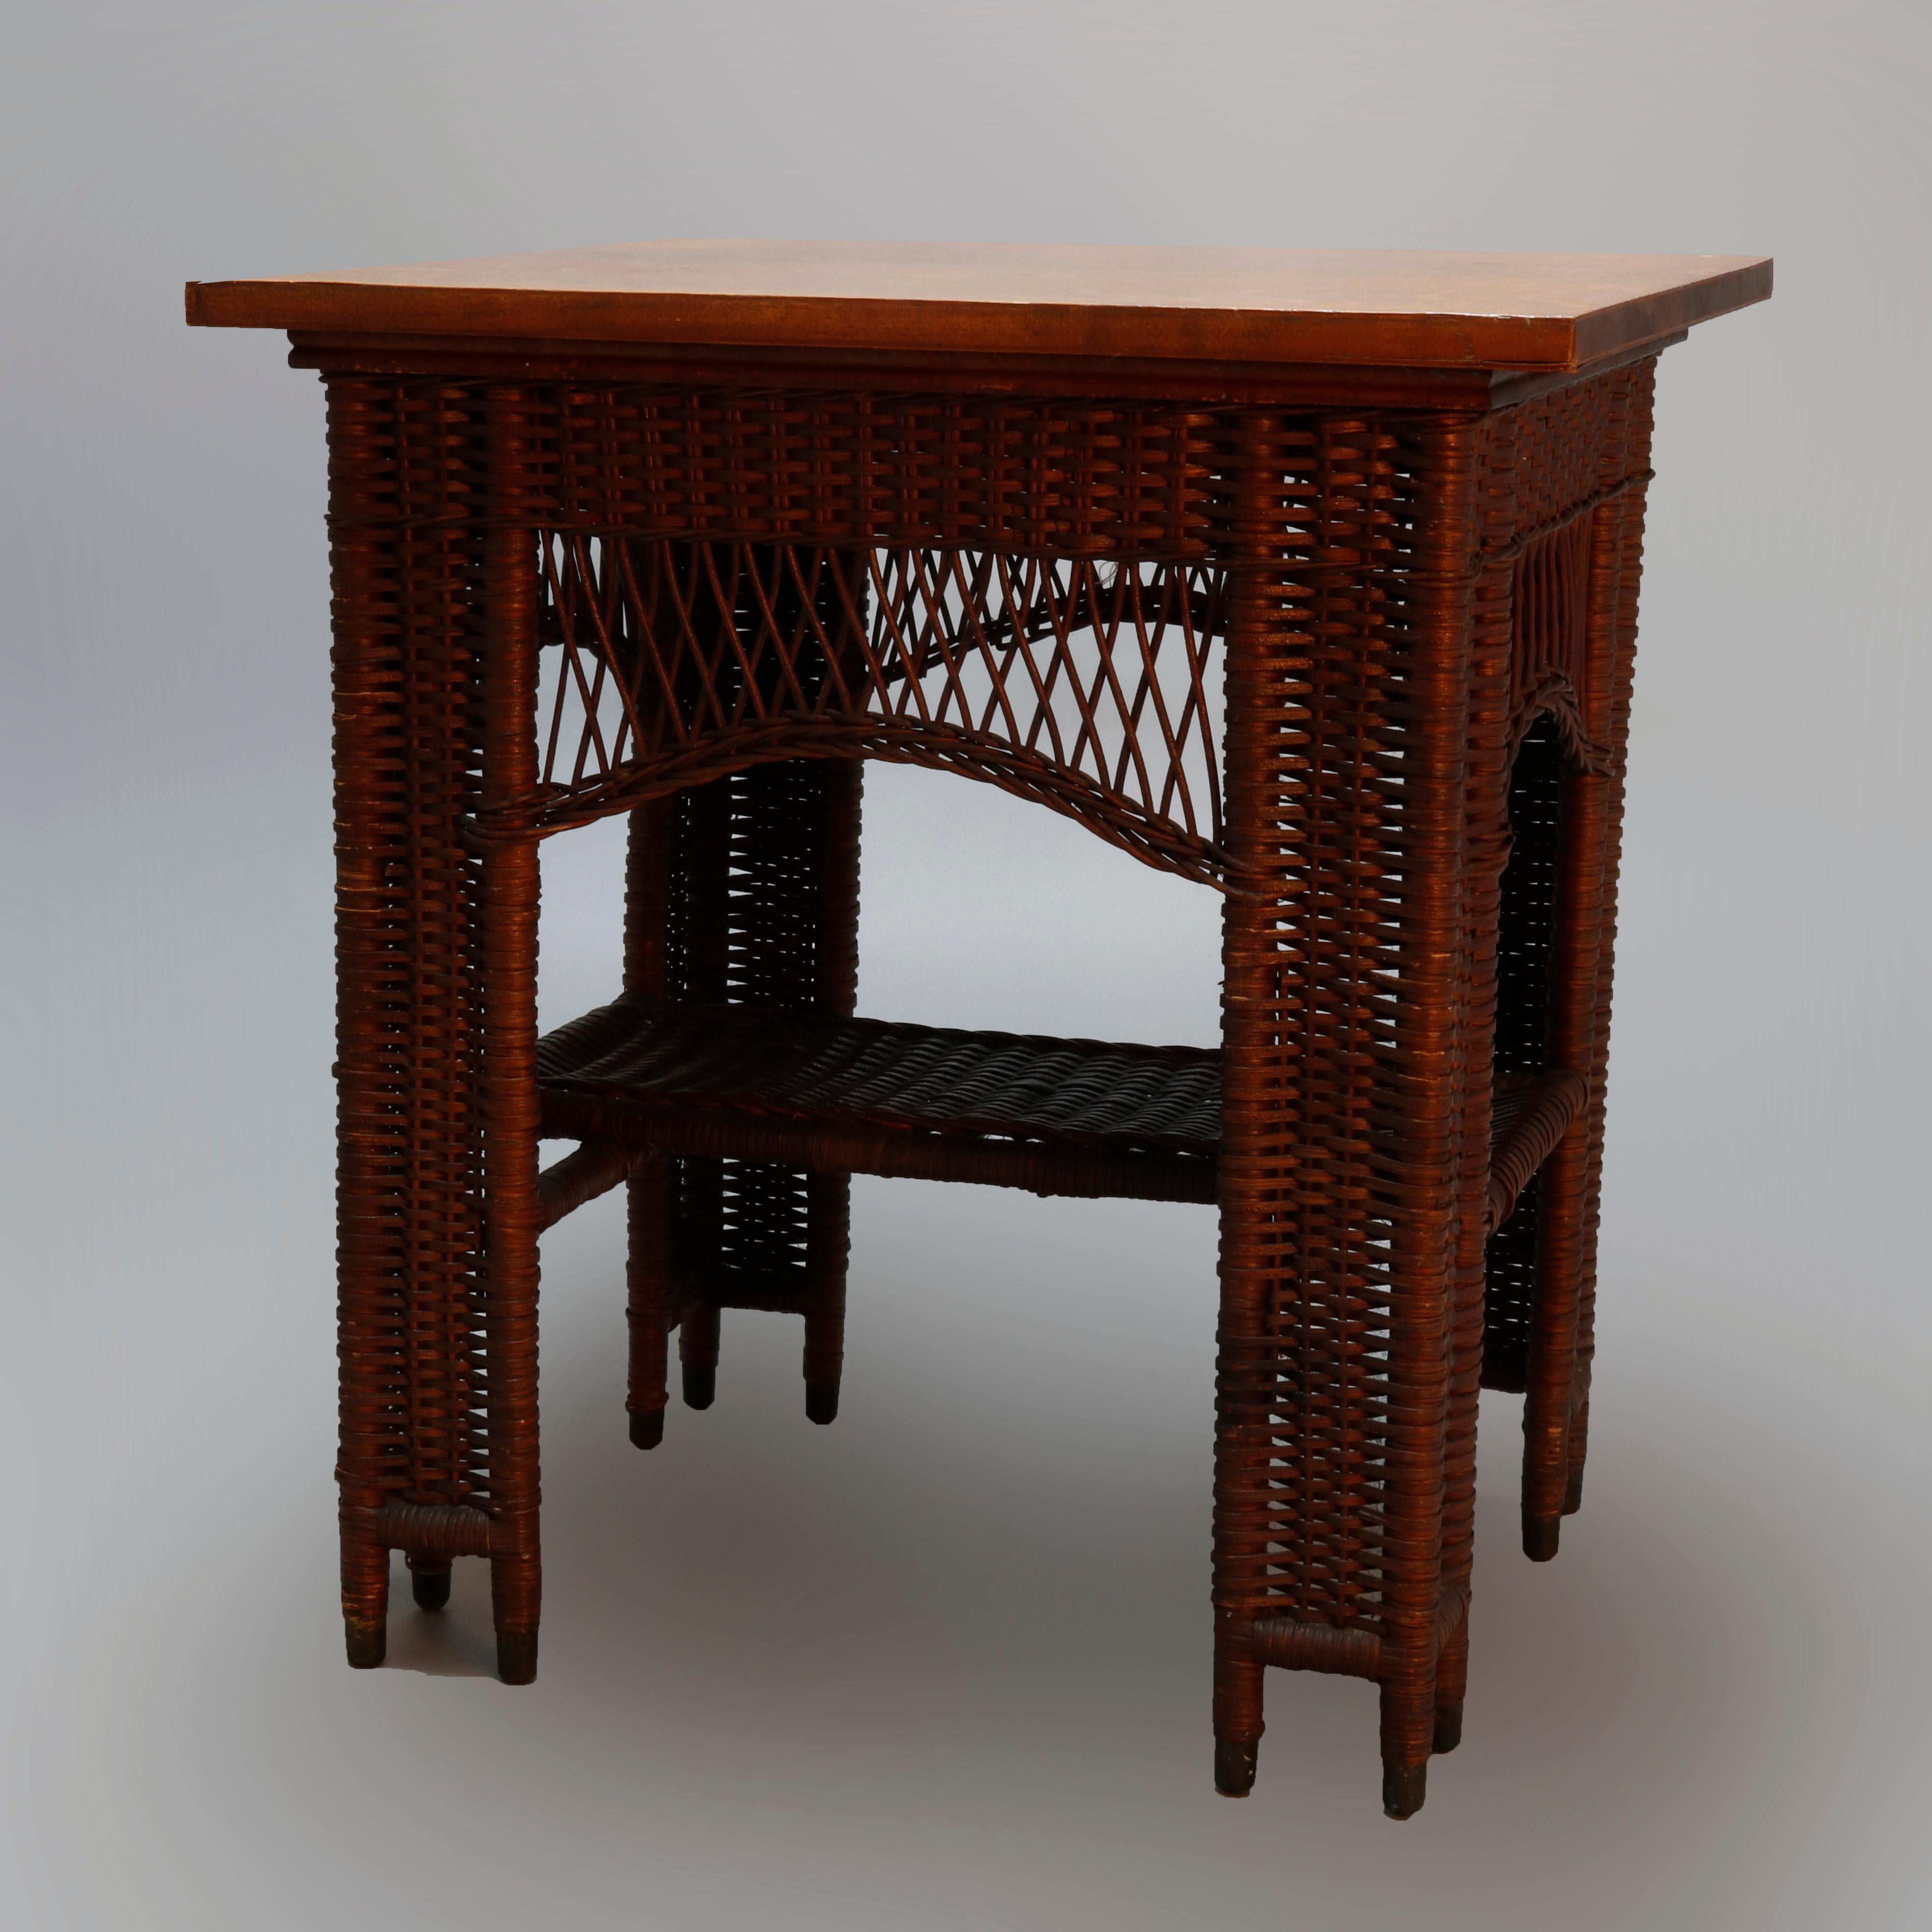 Antique Arts & Crafts lamp table by Heywood Wakefield offers oak frame with wicker panels and shaped skirt with lower display shelf, without label, circa 1910

Measures: 30